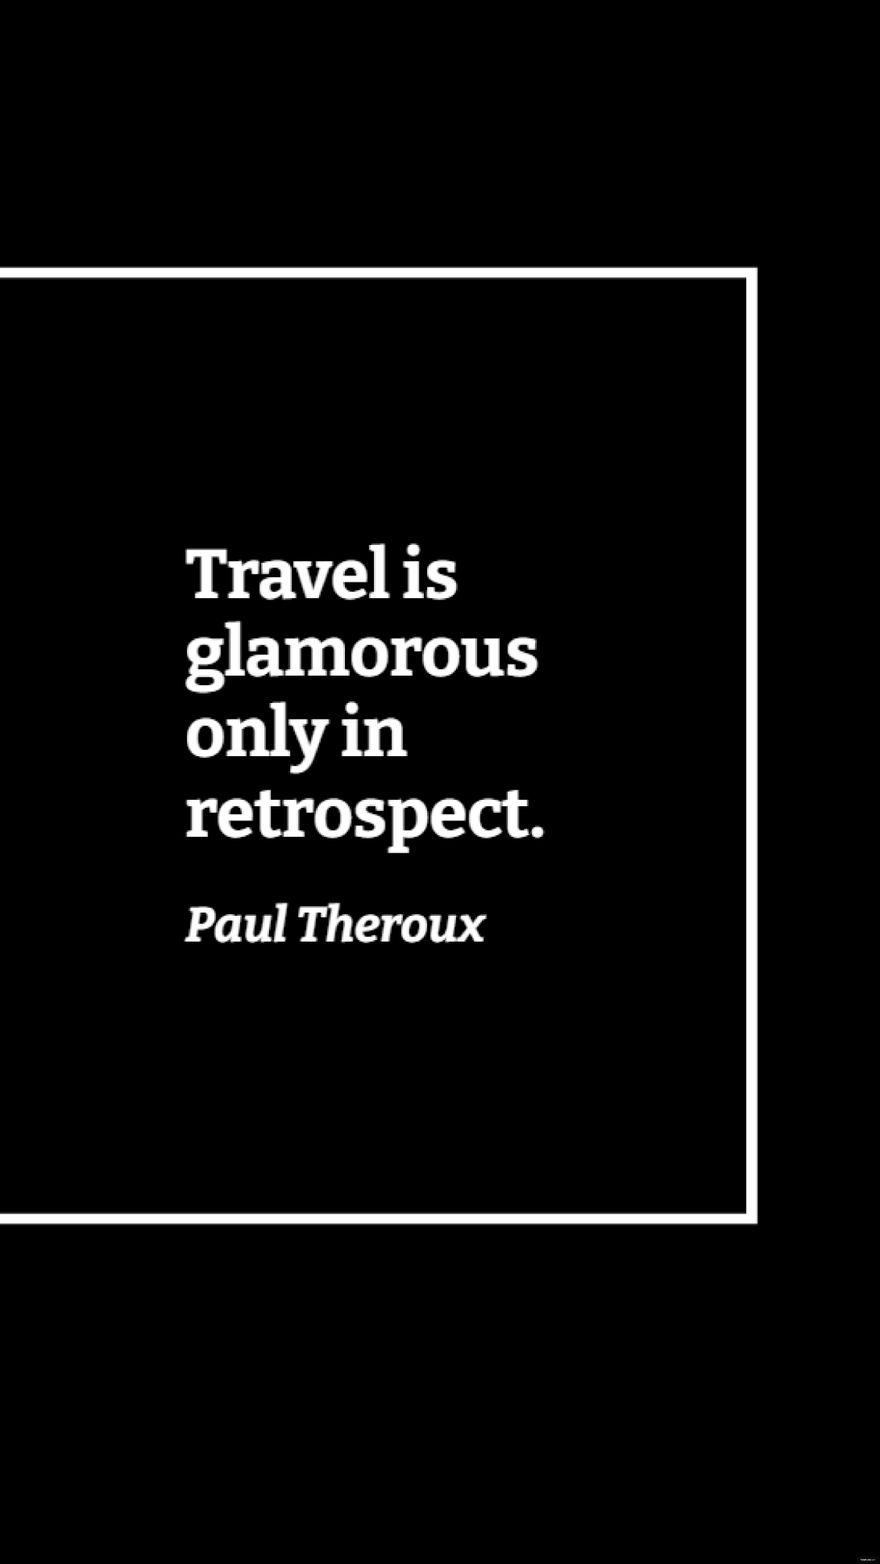 Paul Theroux - Travel is glamorous only in retrospect.